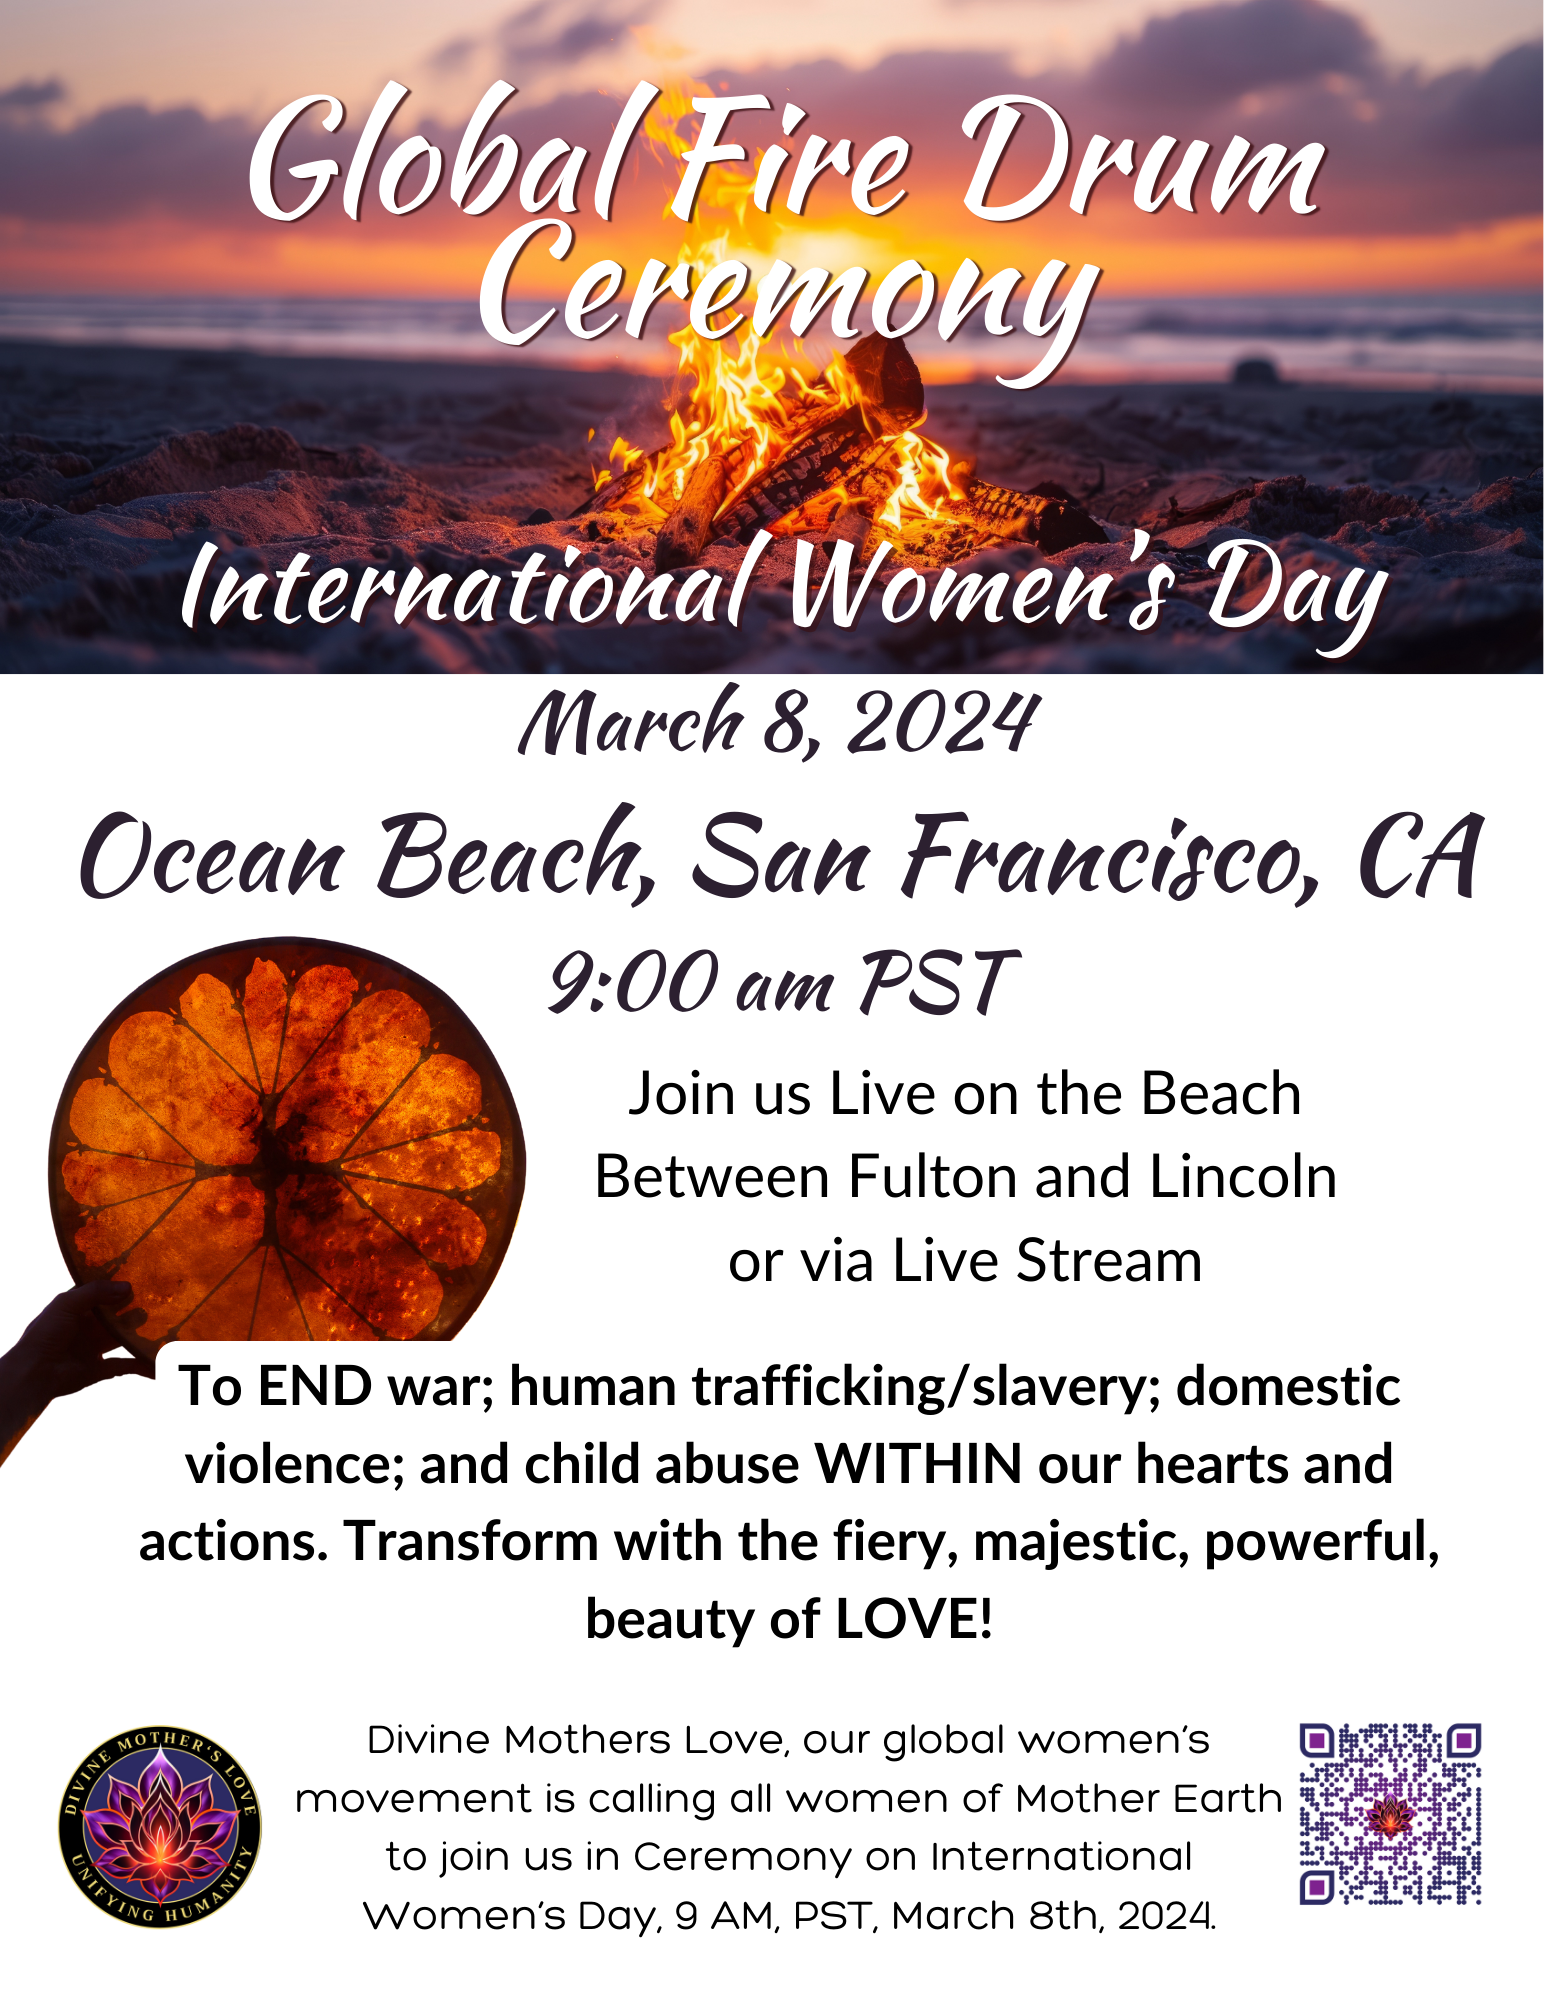 Global Fire Drum Ceremony<br />
International Womens Day 2024 Ocean Beach SF, CA  9am PST.<br />
More Details to come